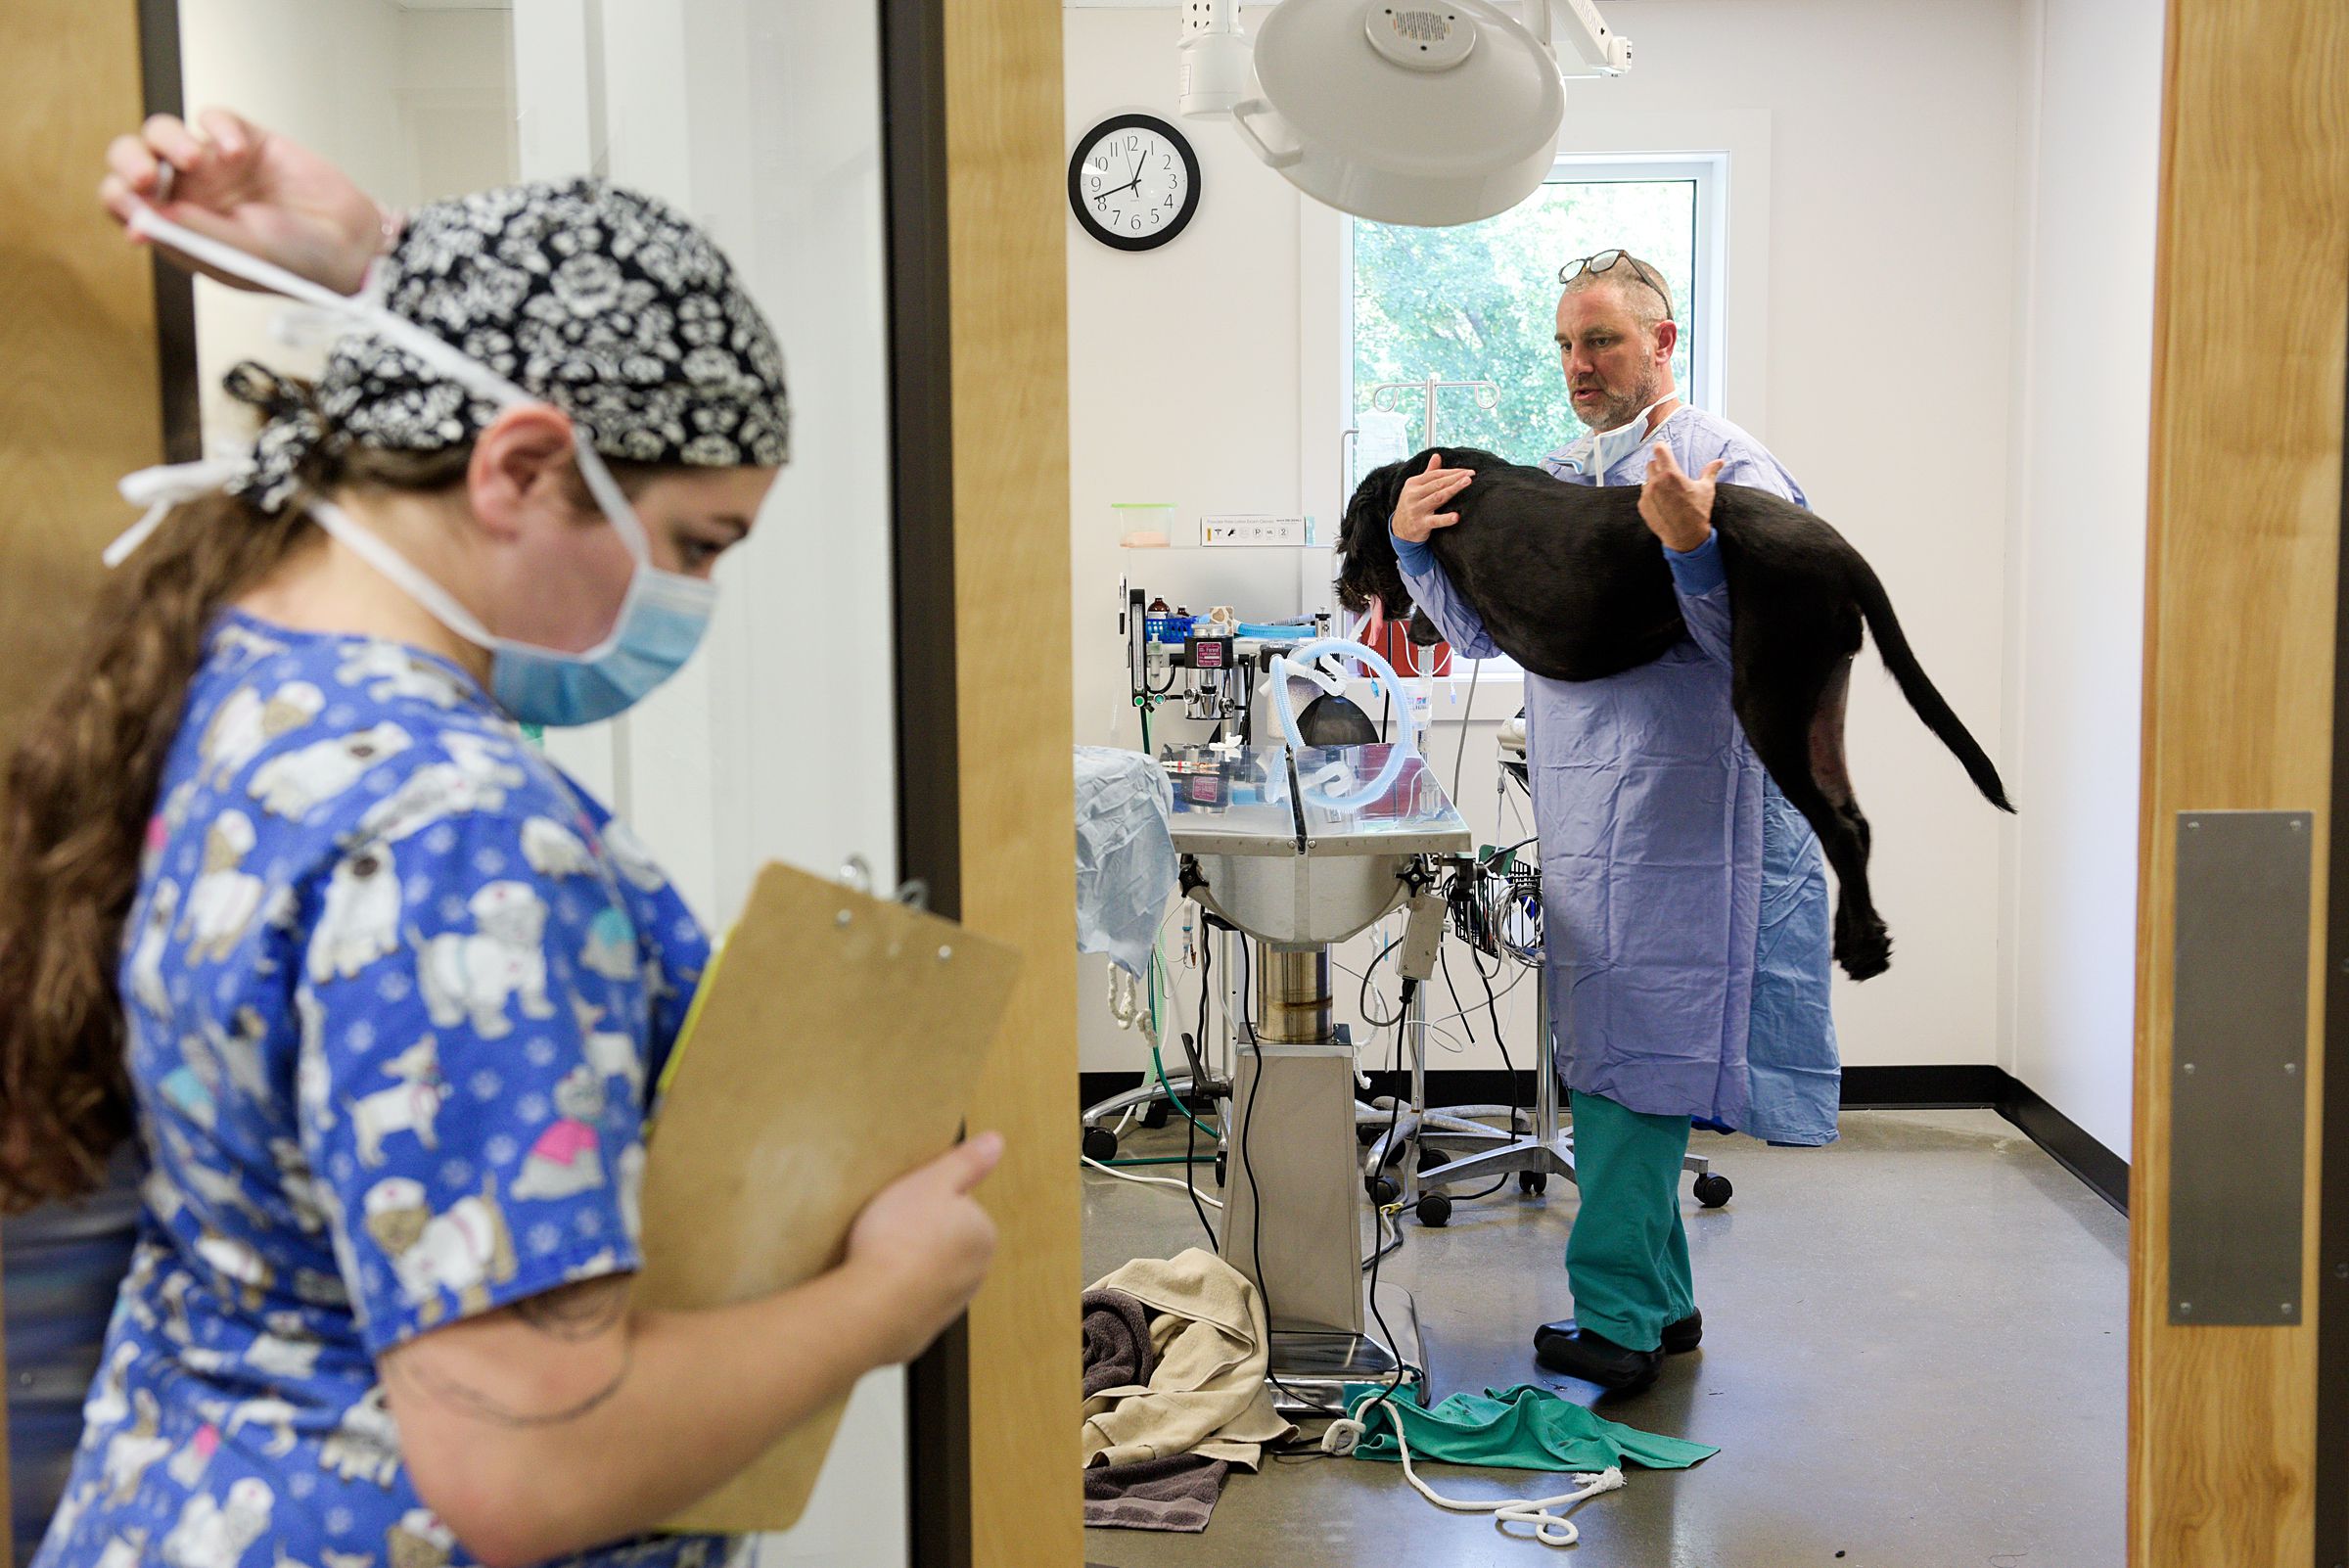 Certfied veterinary technician Kate Rousseau, left, holds open the operating room door as Dr. Dan Kelly carries Abbie to a recovery stall after replacing  the anterior cruciate ligament in one of her back knees with a suture of heavy plastic line at Stonecliff Animal Clinic in Lebanon, N.H., Friday, Sept. 24, 2019. The clinic, which has two locations, employs six technicians, three full-time vets, and two part-time vets. (Valley News - James M. Patterson) Copyright Valley News. May not be reprinted or used online without permission. Send requests to permission@vnews.com.